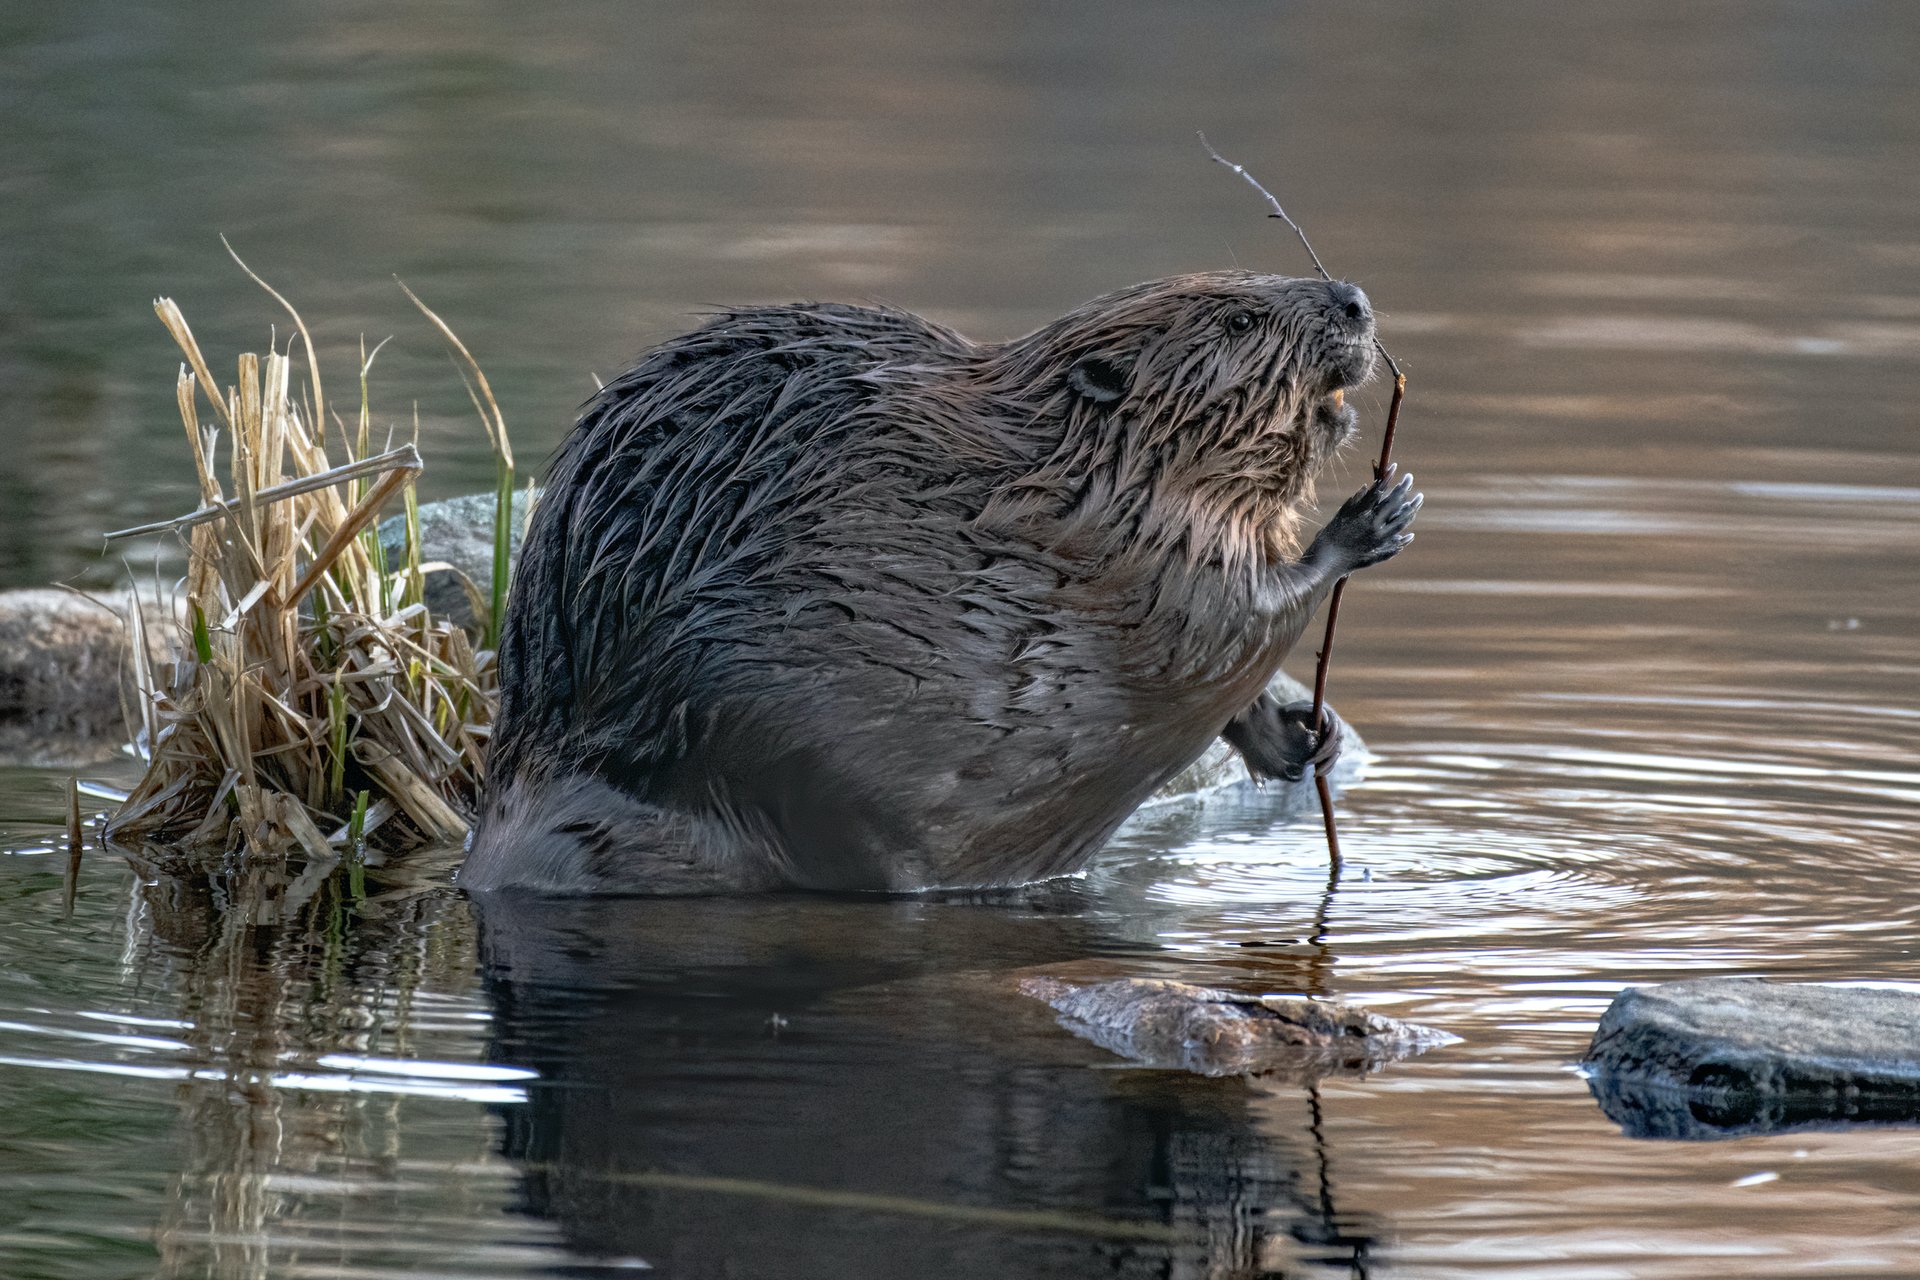 A beaver sitting on a log in the water, with its front paws grasping a stick.